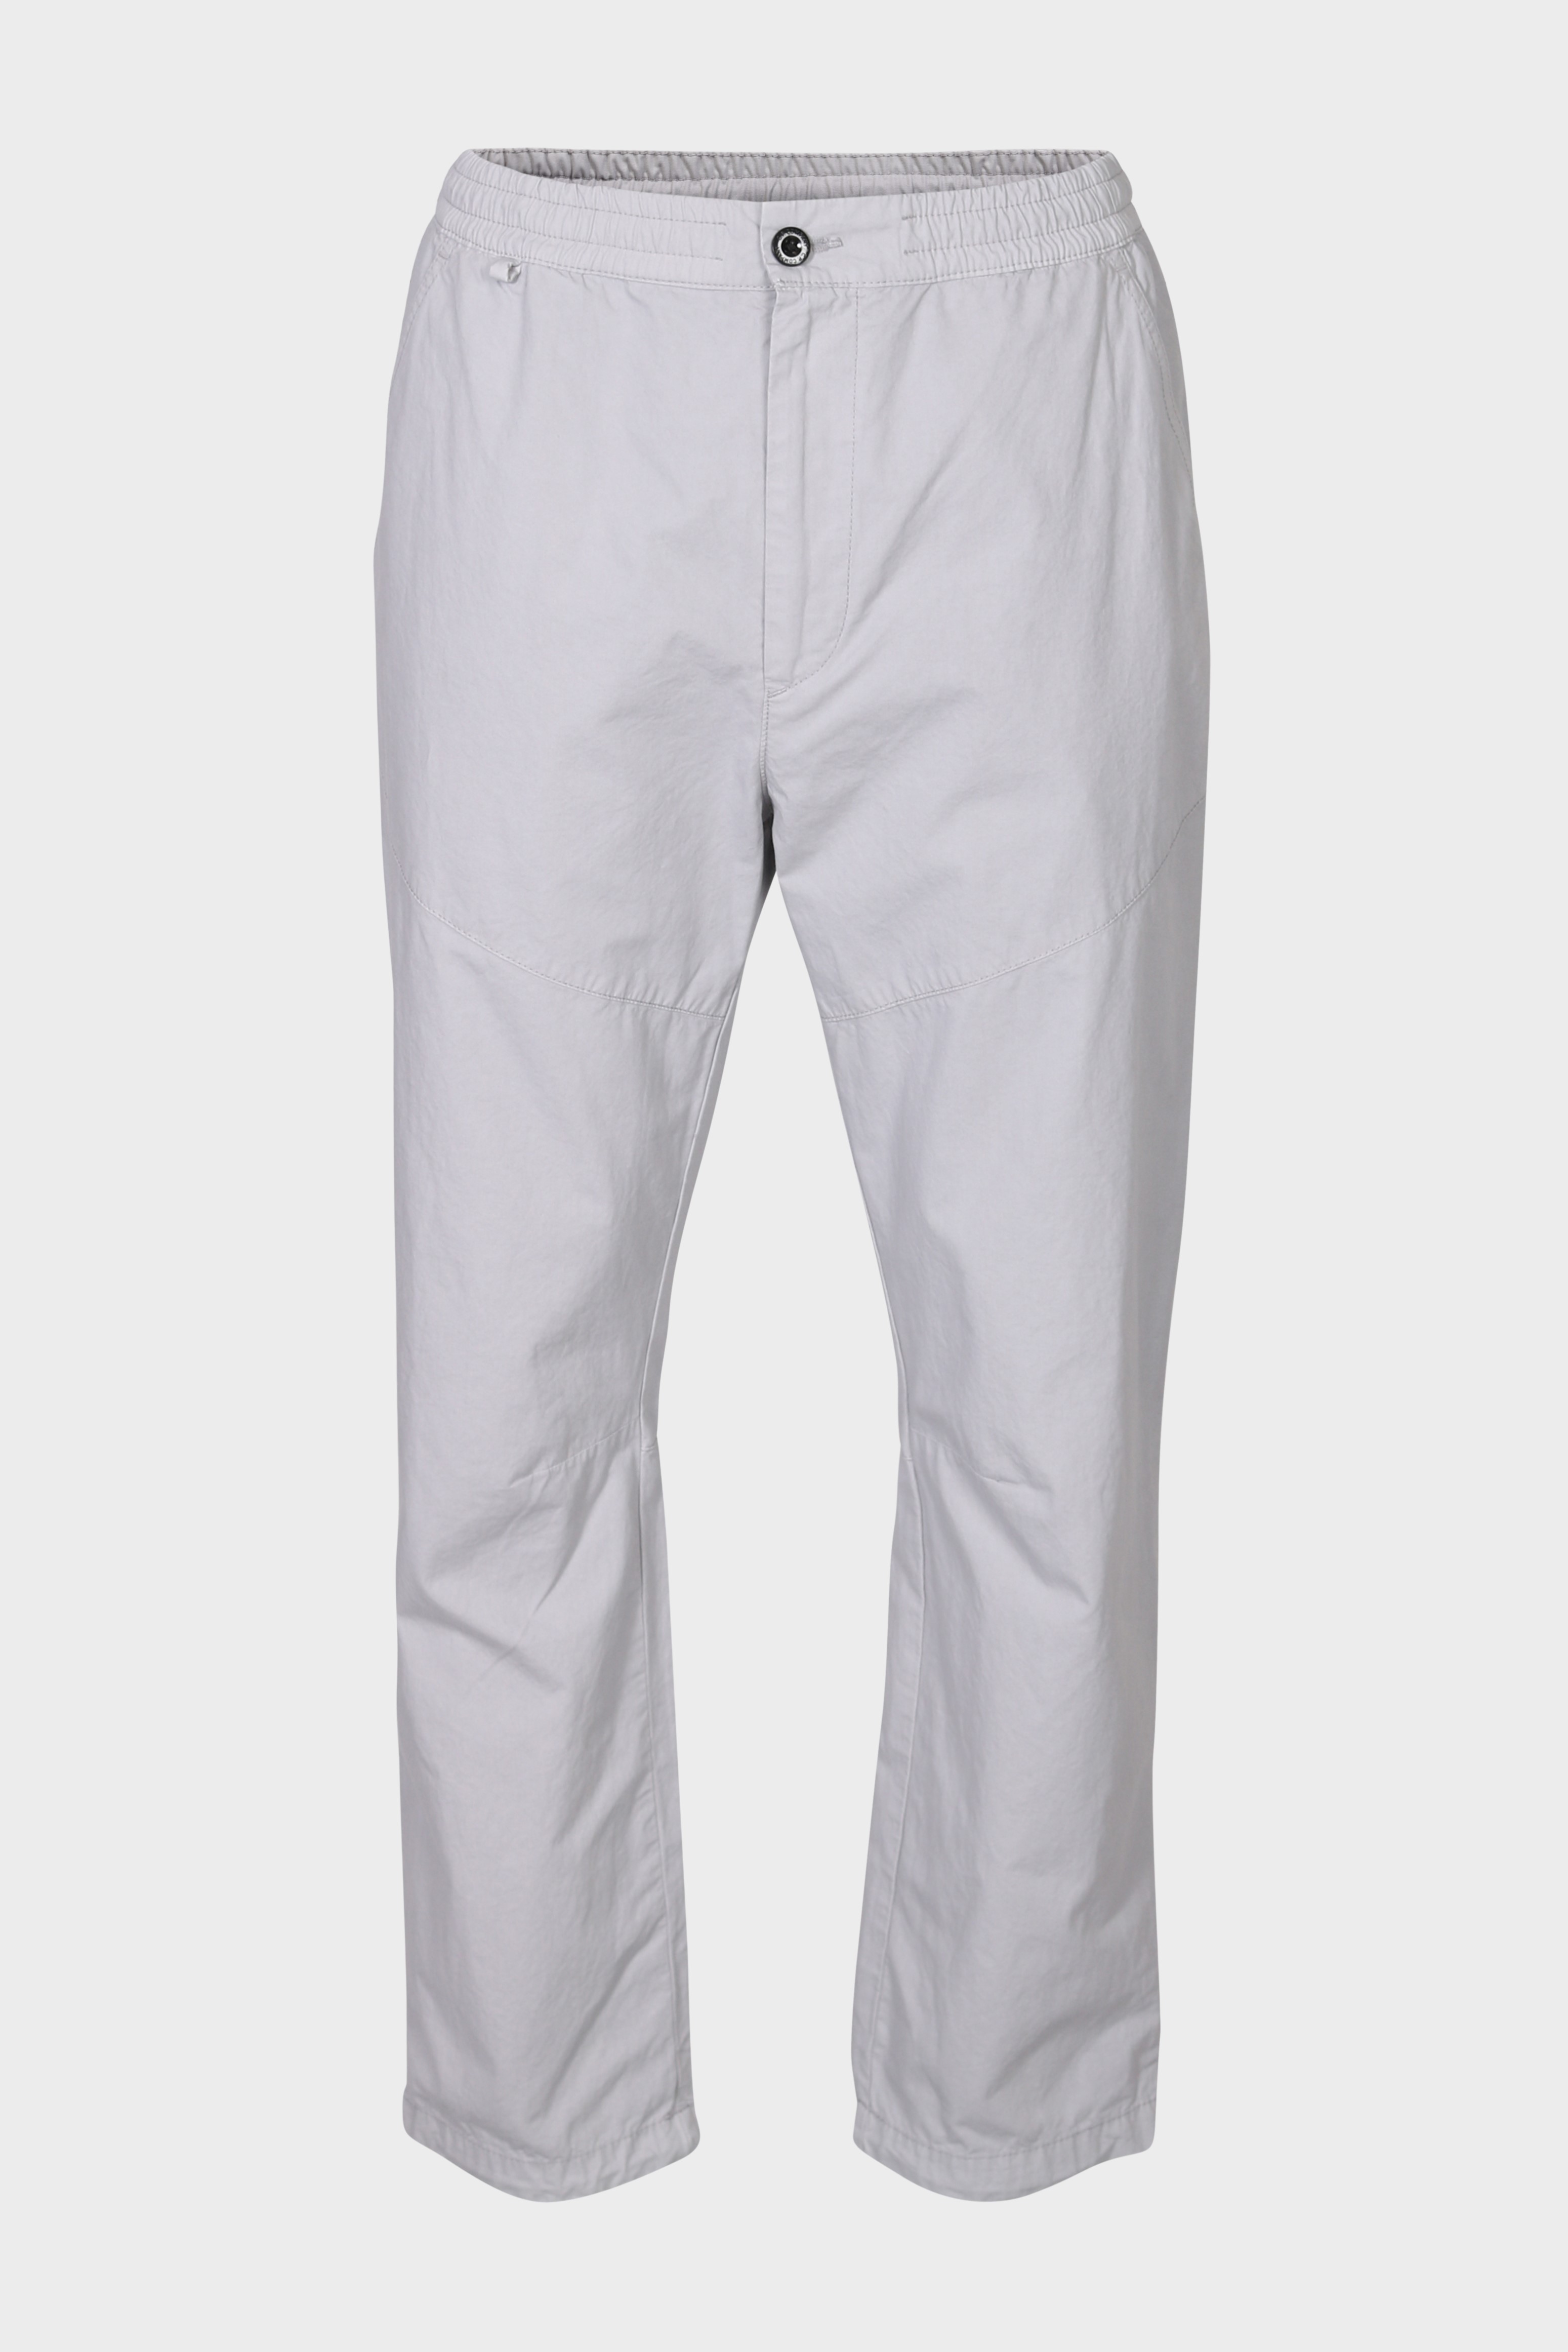 C.P. COMPANY Worker Pant in Drizzle Grey